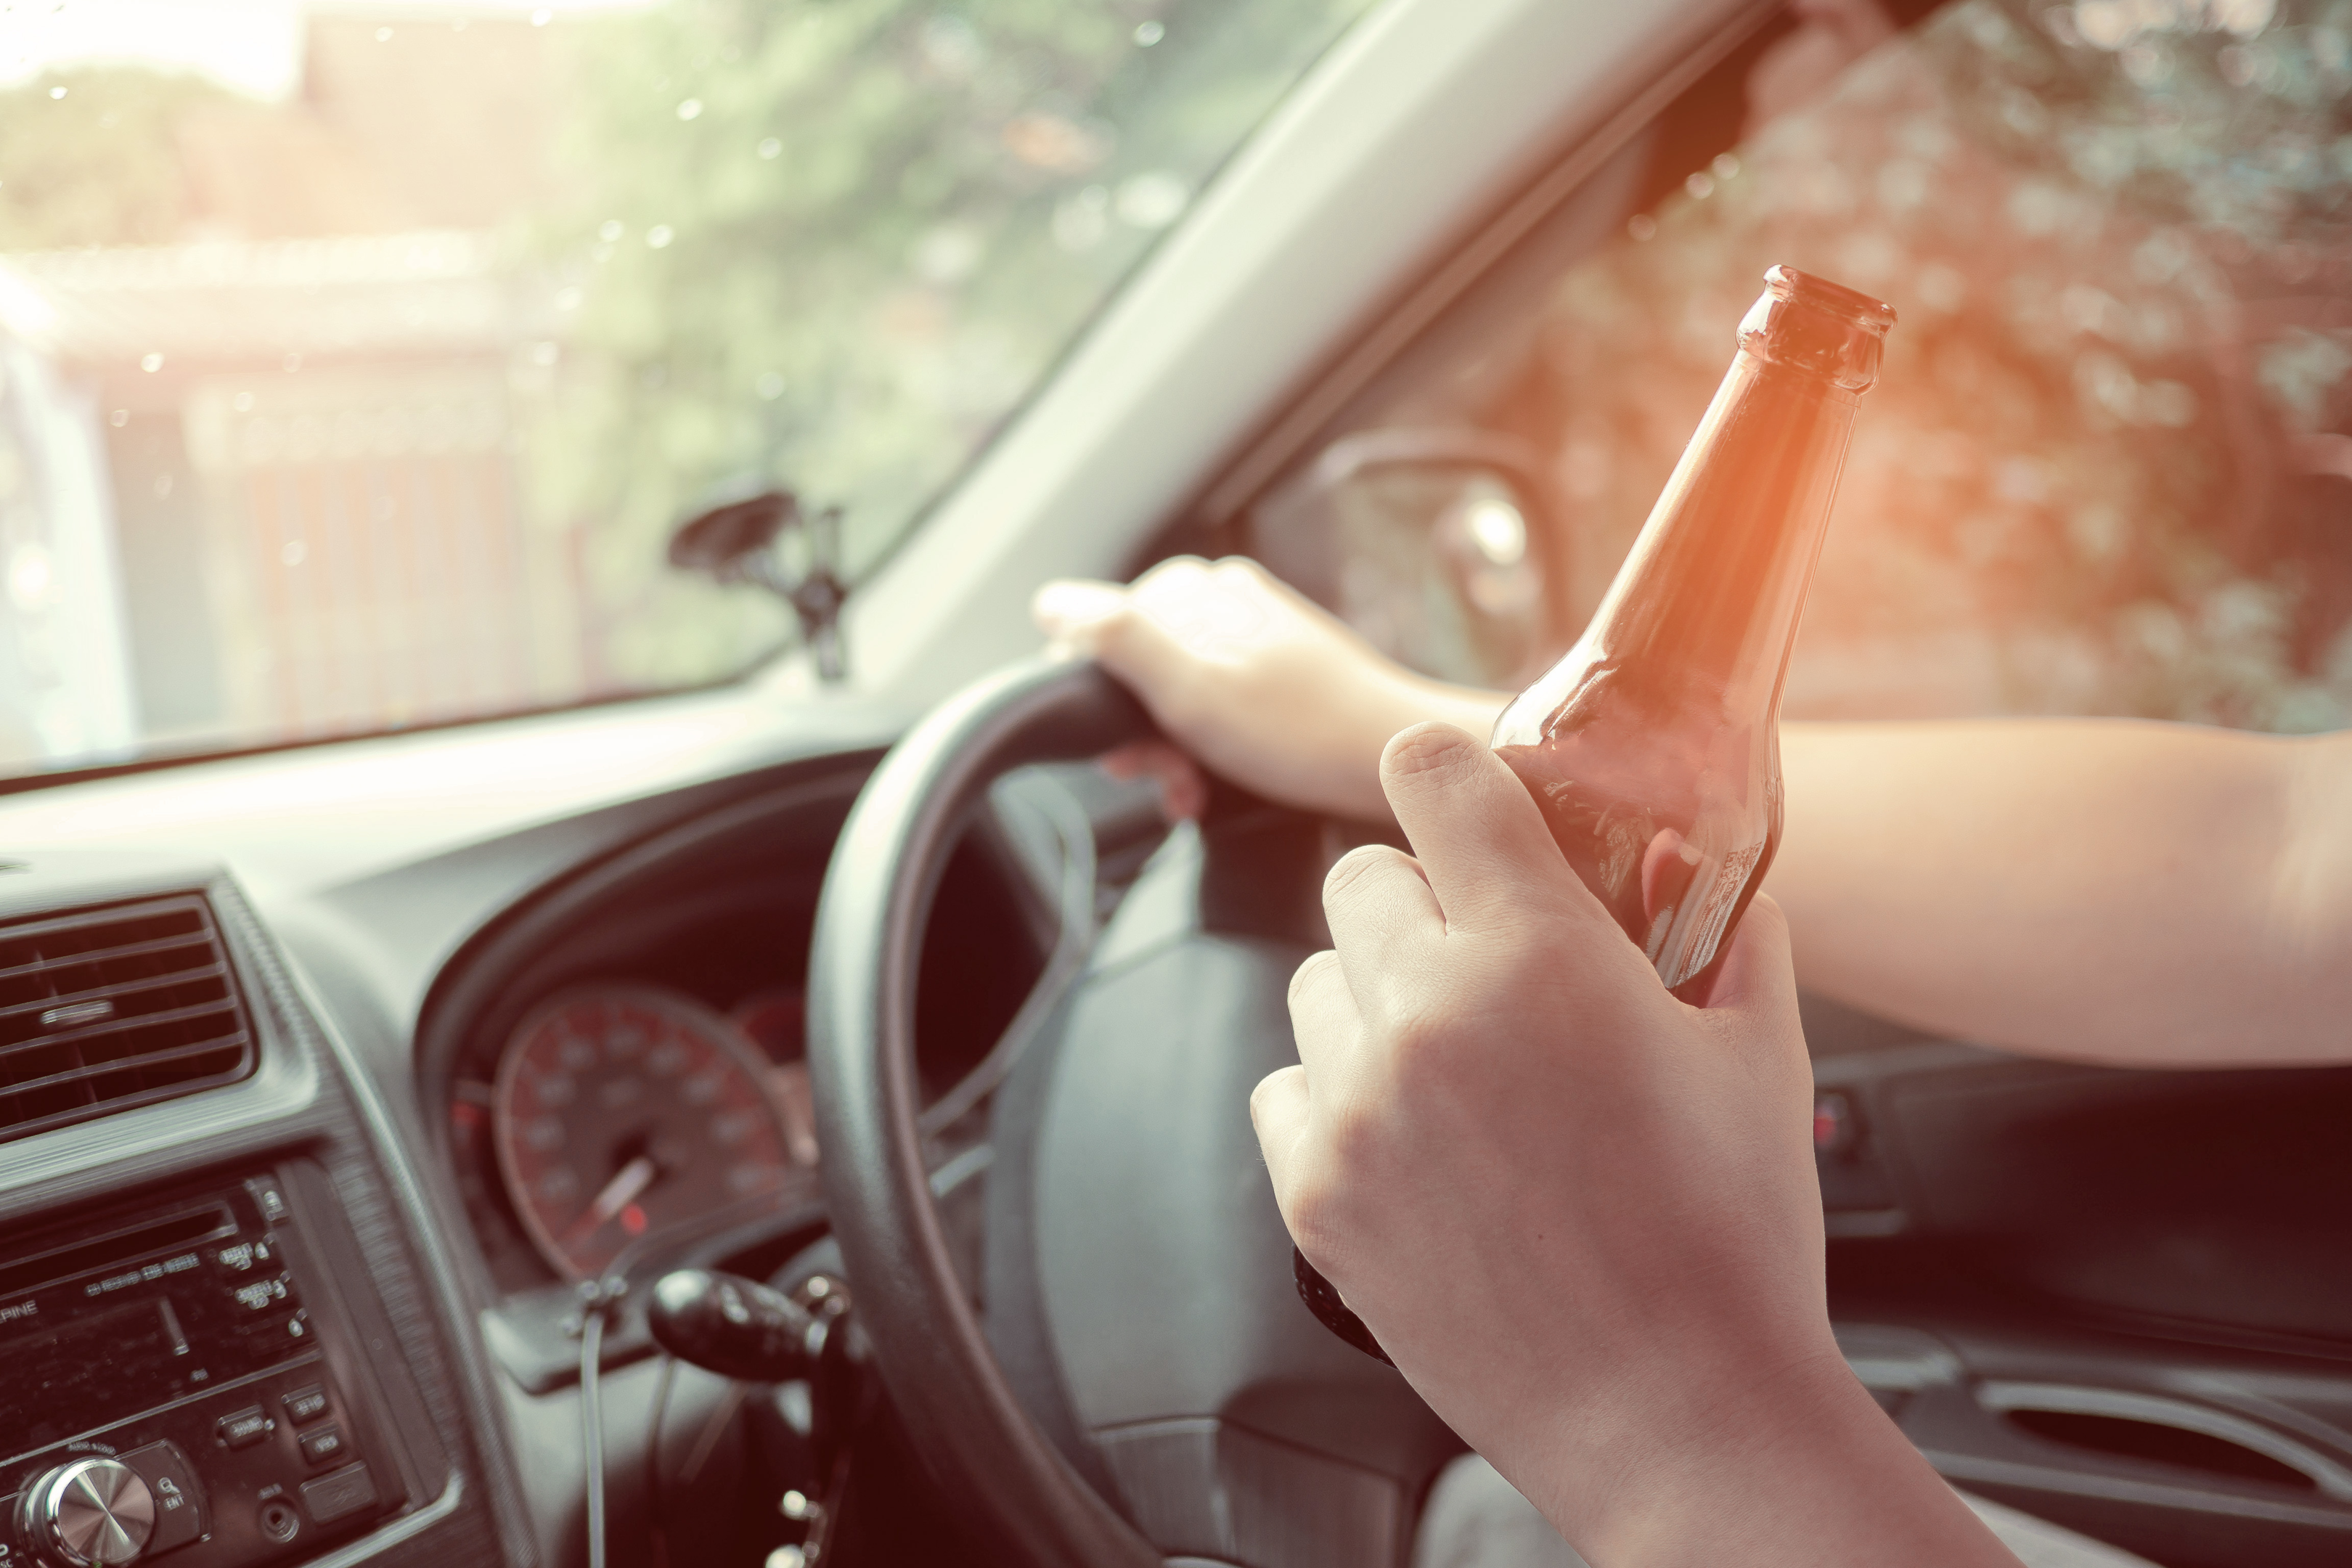 Person driving with beer bottle in hand - Chicago Criminal Defense Attorney